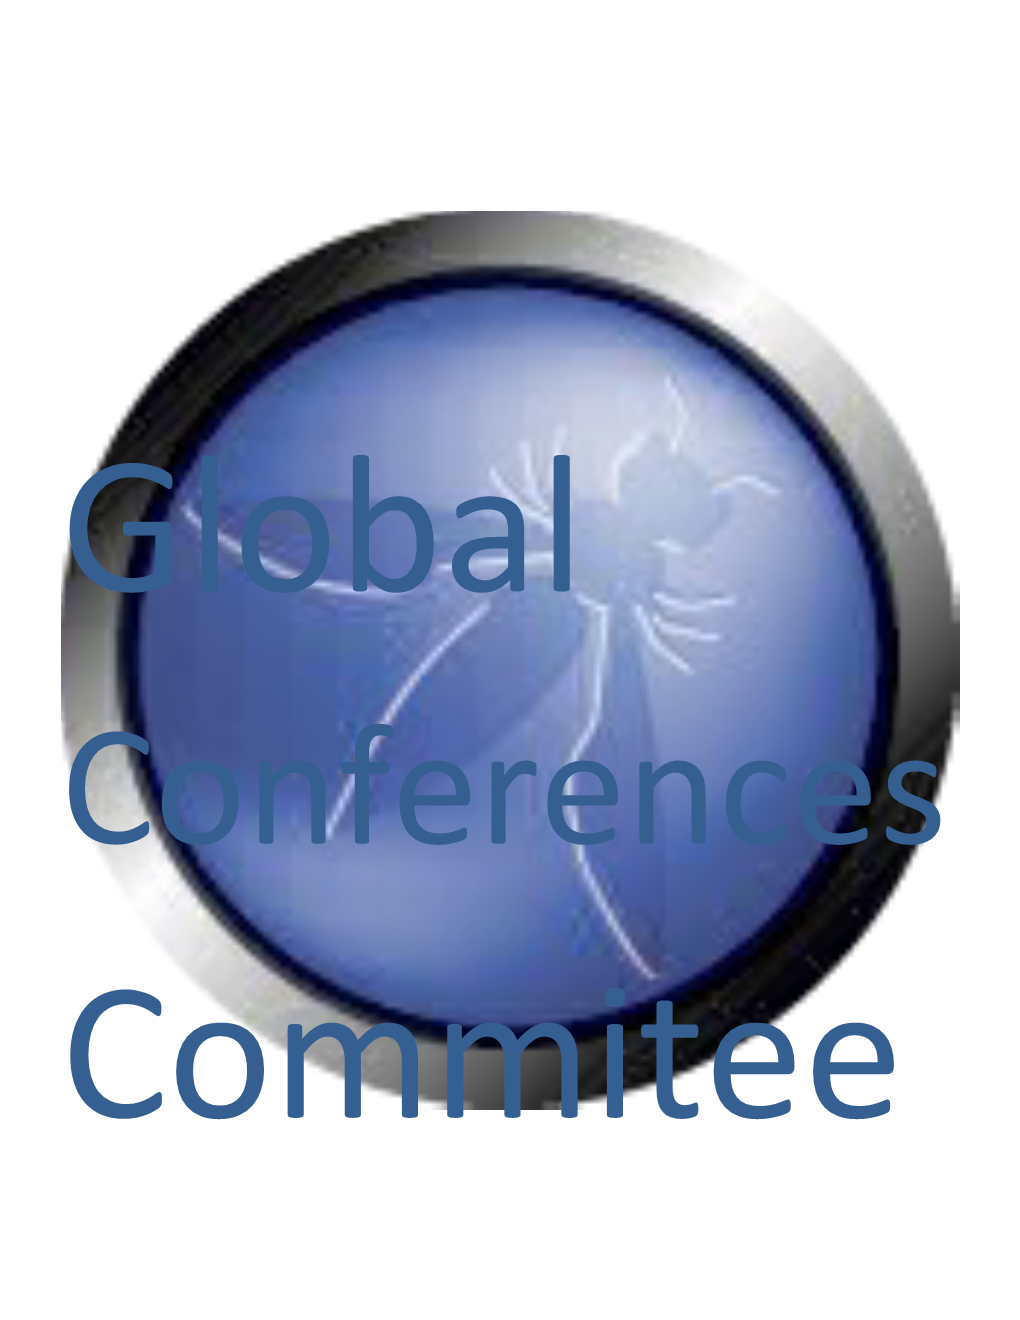 Global Conference Committee